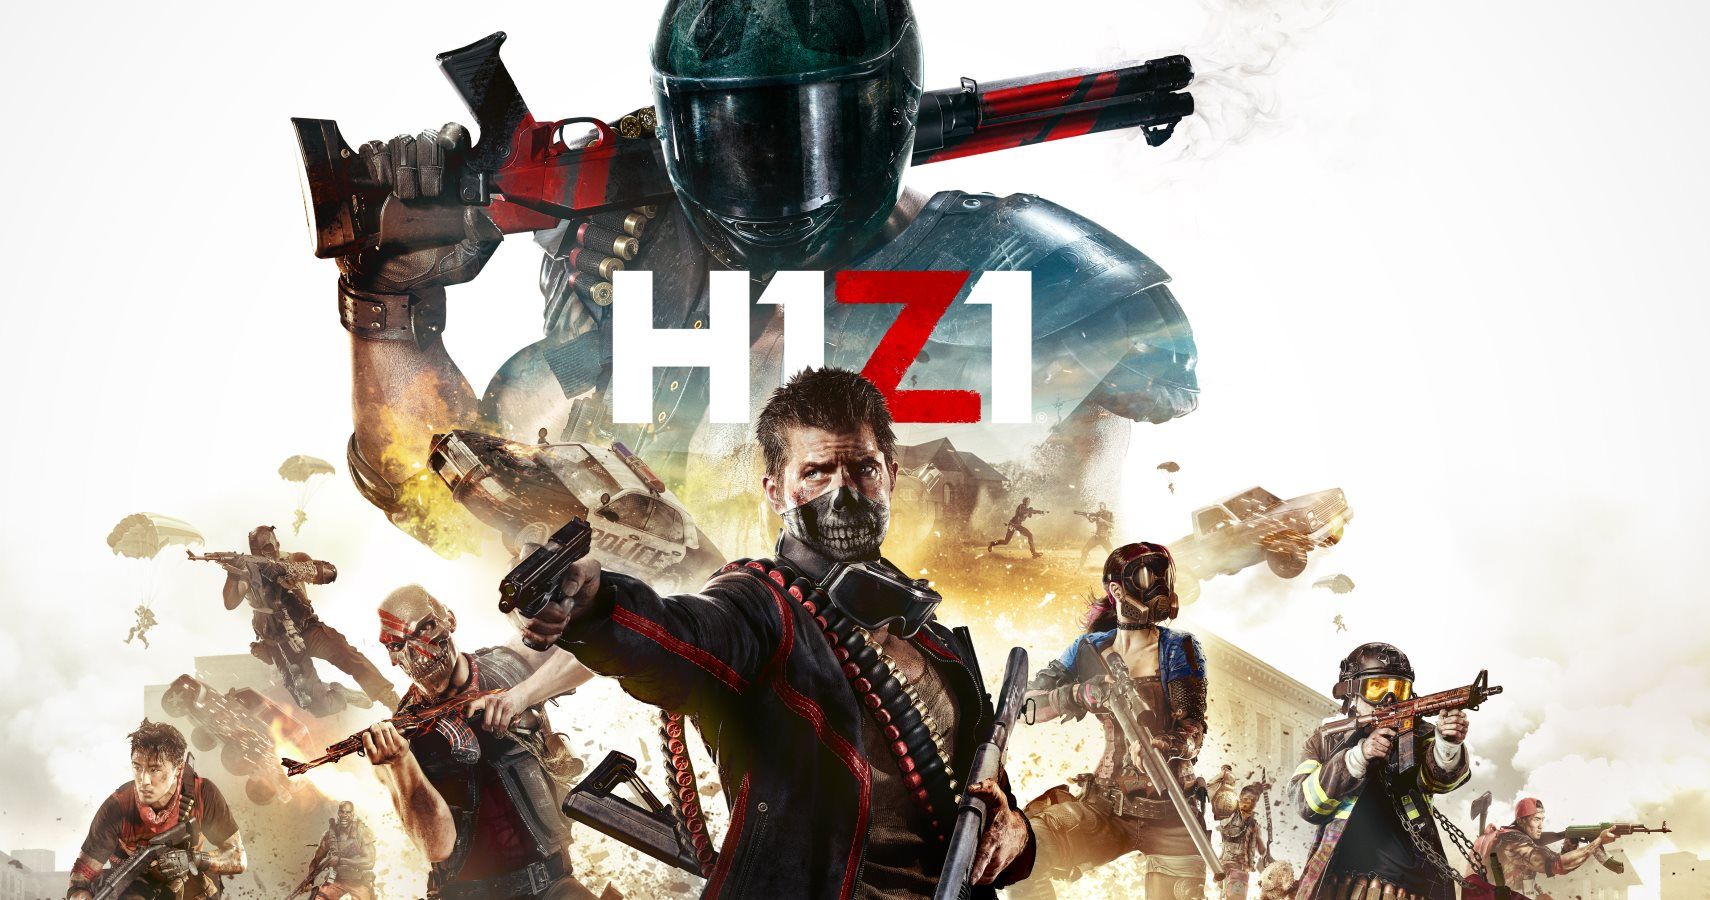 H1Z1's Player Base Dropped By 91% Since PUBG And Fortnite Took Over Battle Royale